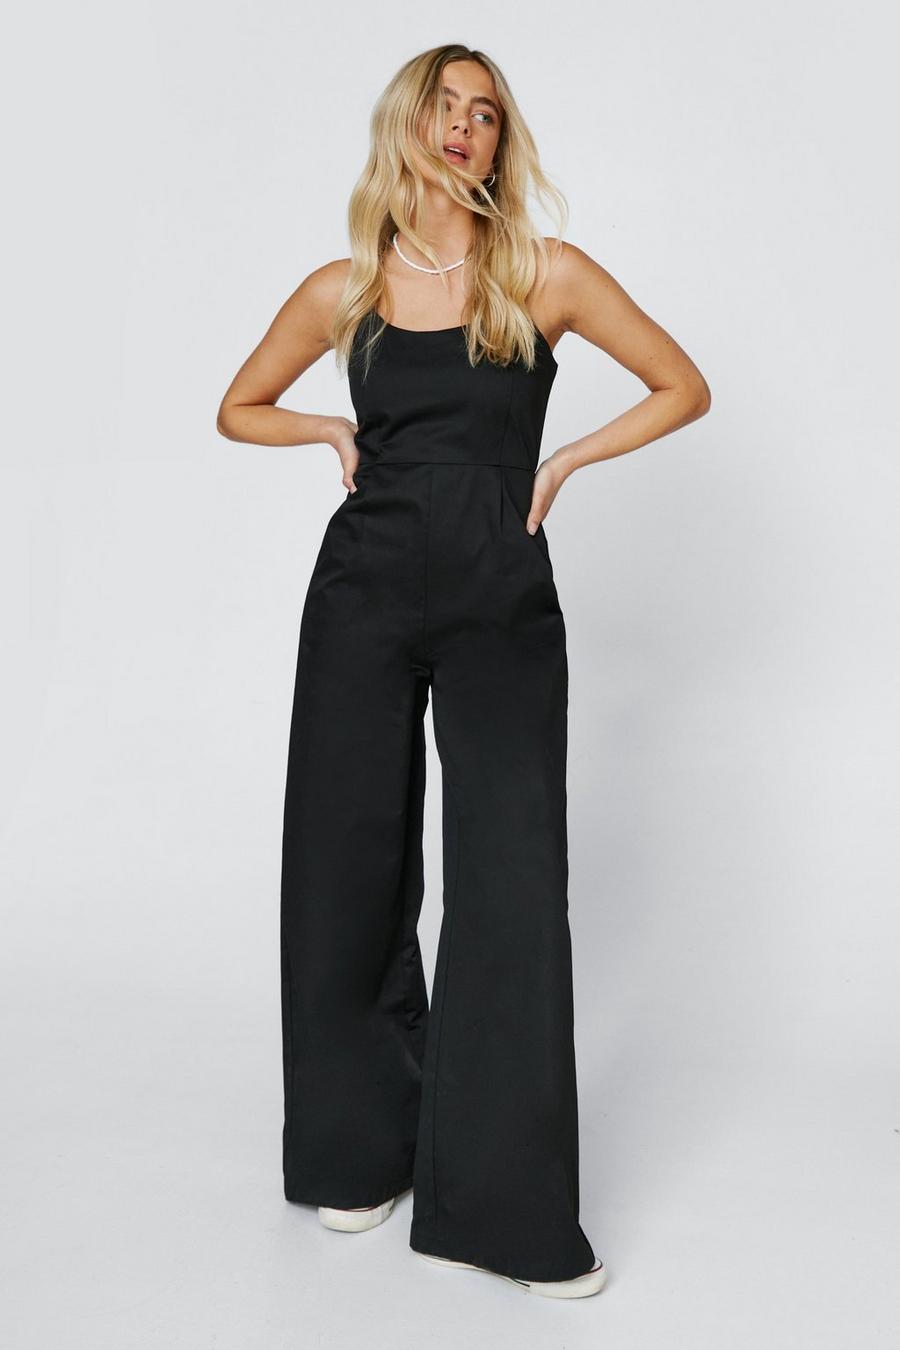 Nasty Gal Lovely Day Follow Suit Cutout Jumpsuit Black $88 NG18 